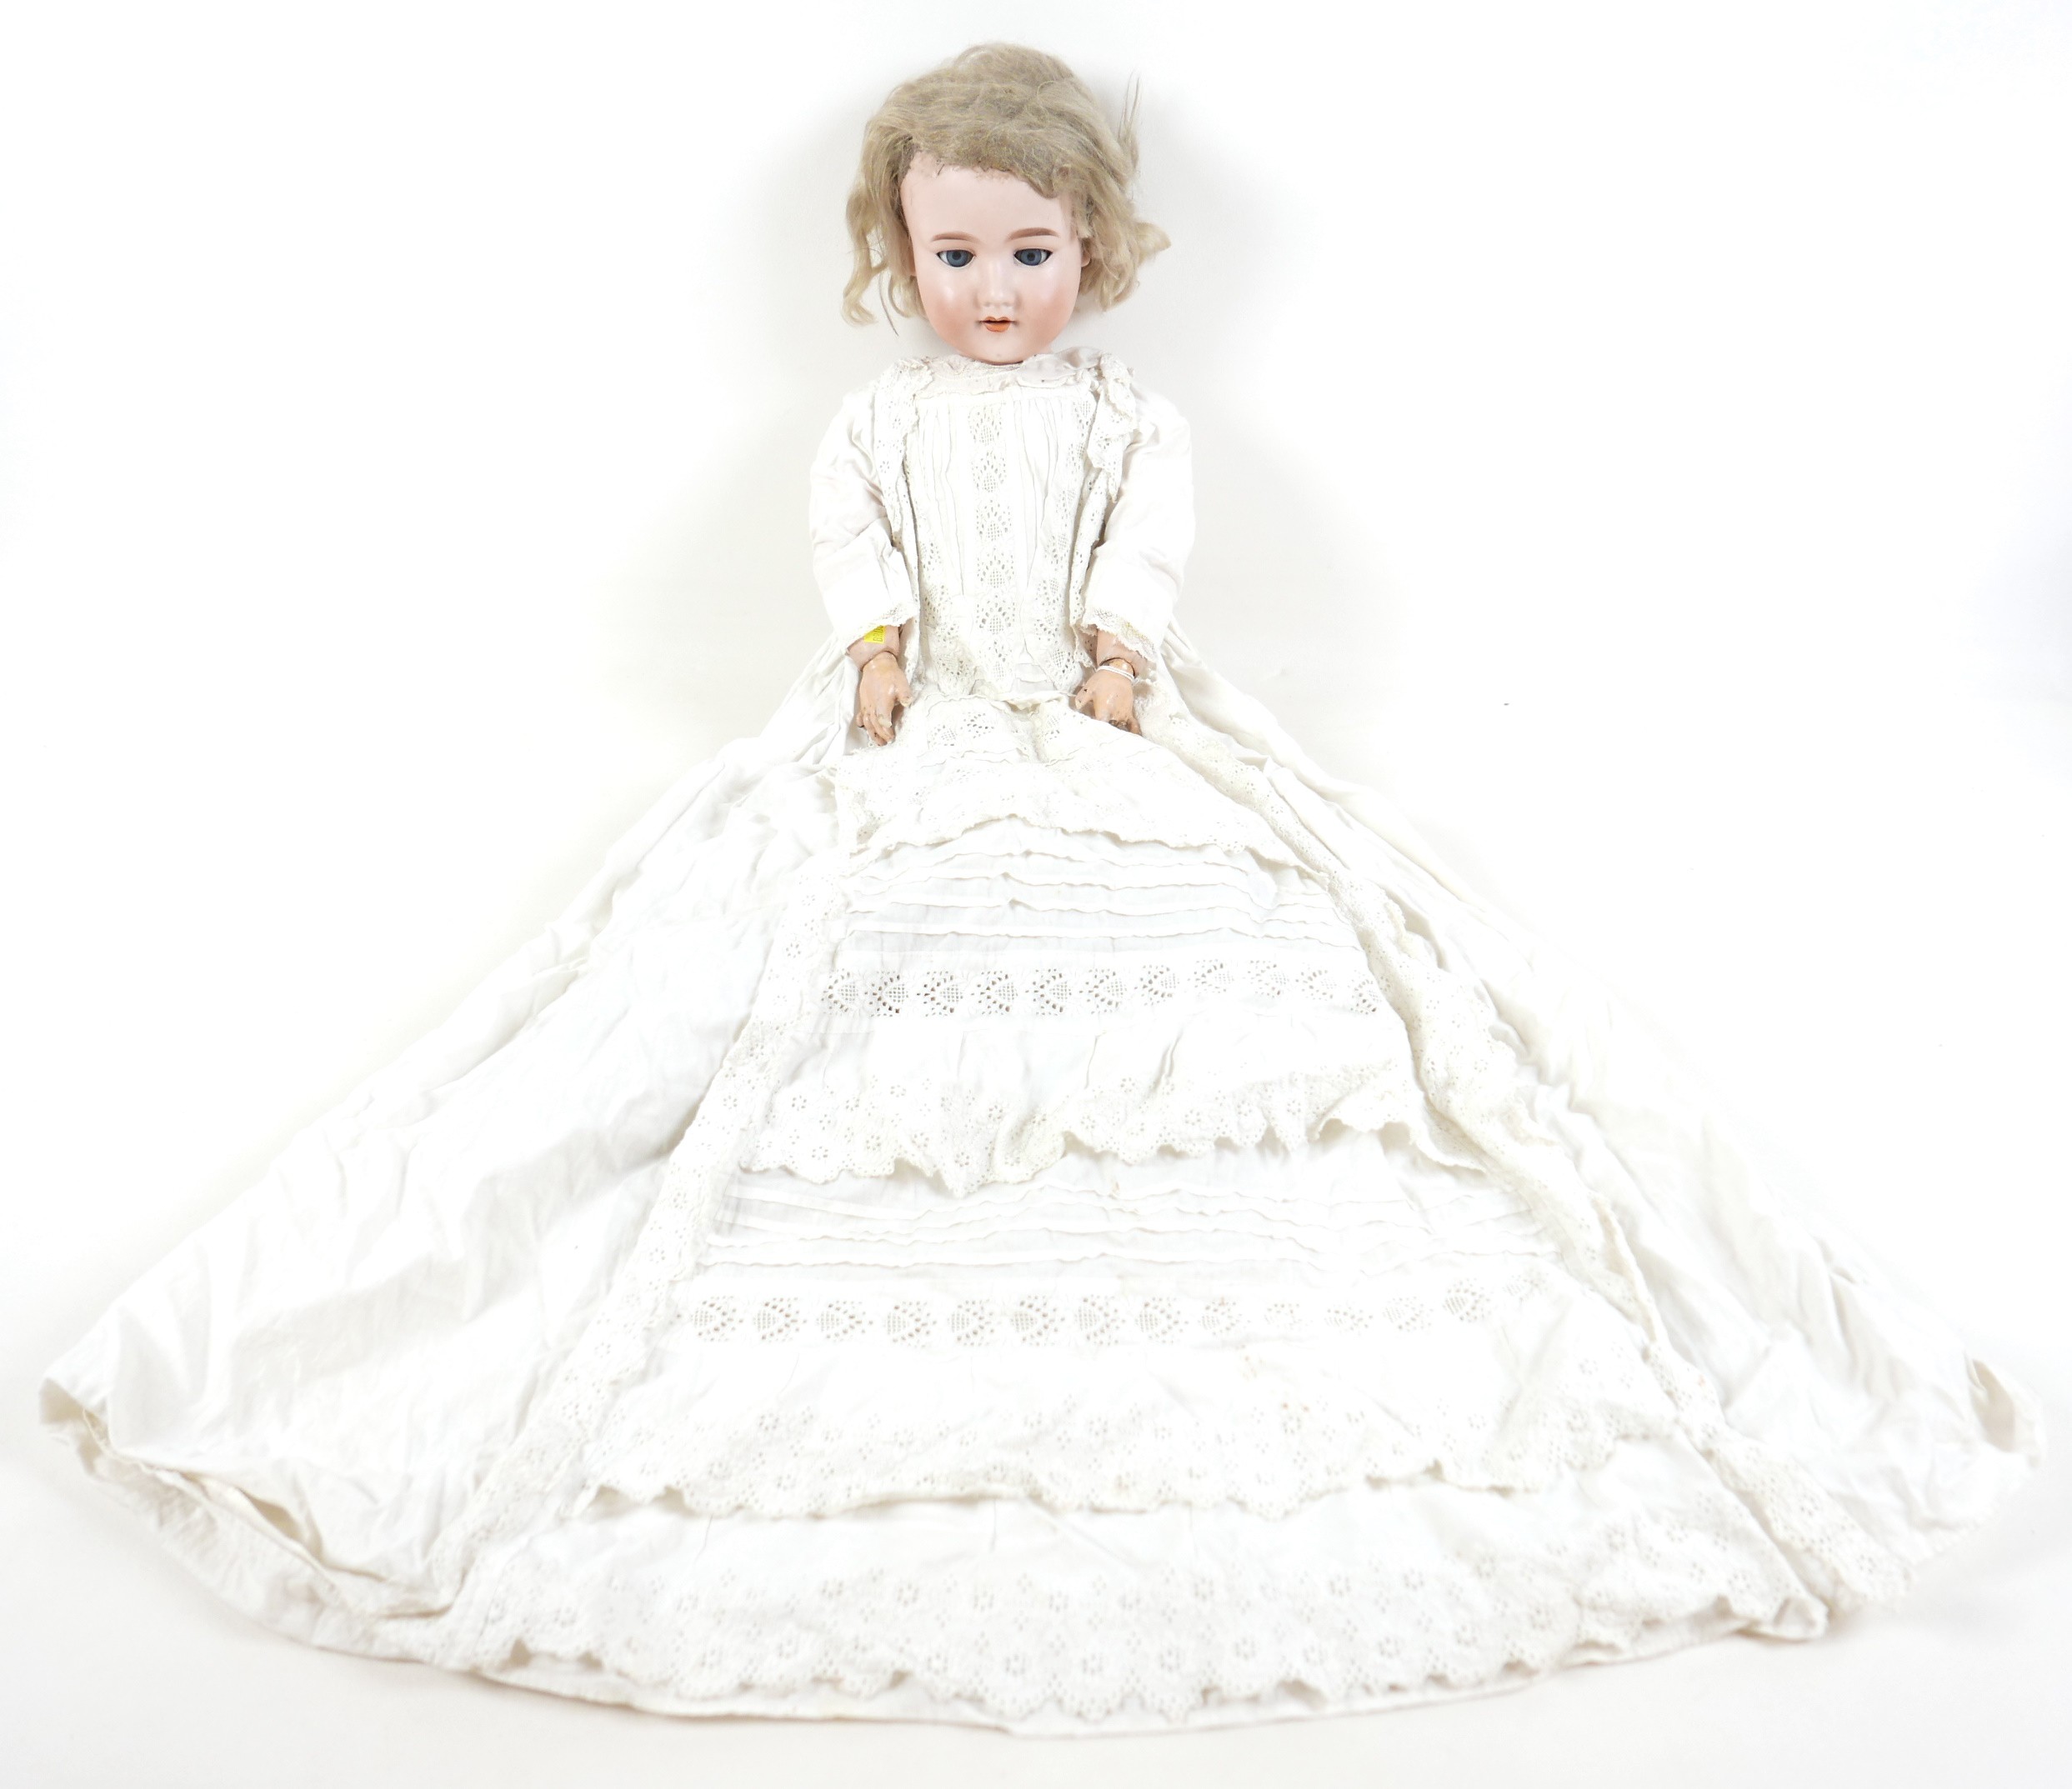 An Armand Marseille bisque porcelain headed doll with open mouth and sleepy eyes, 80cm tall. Some